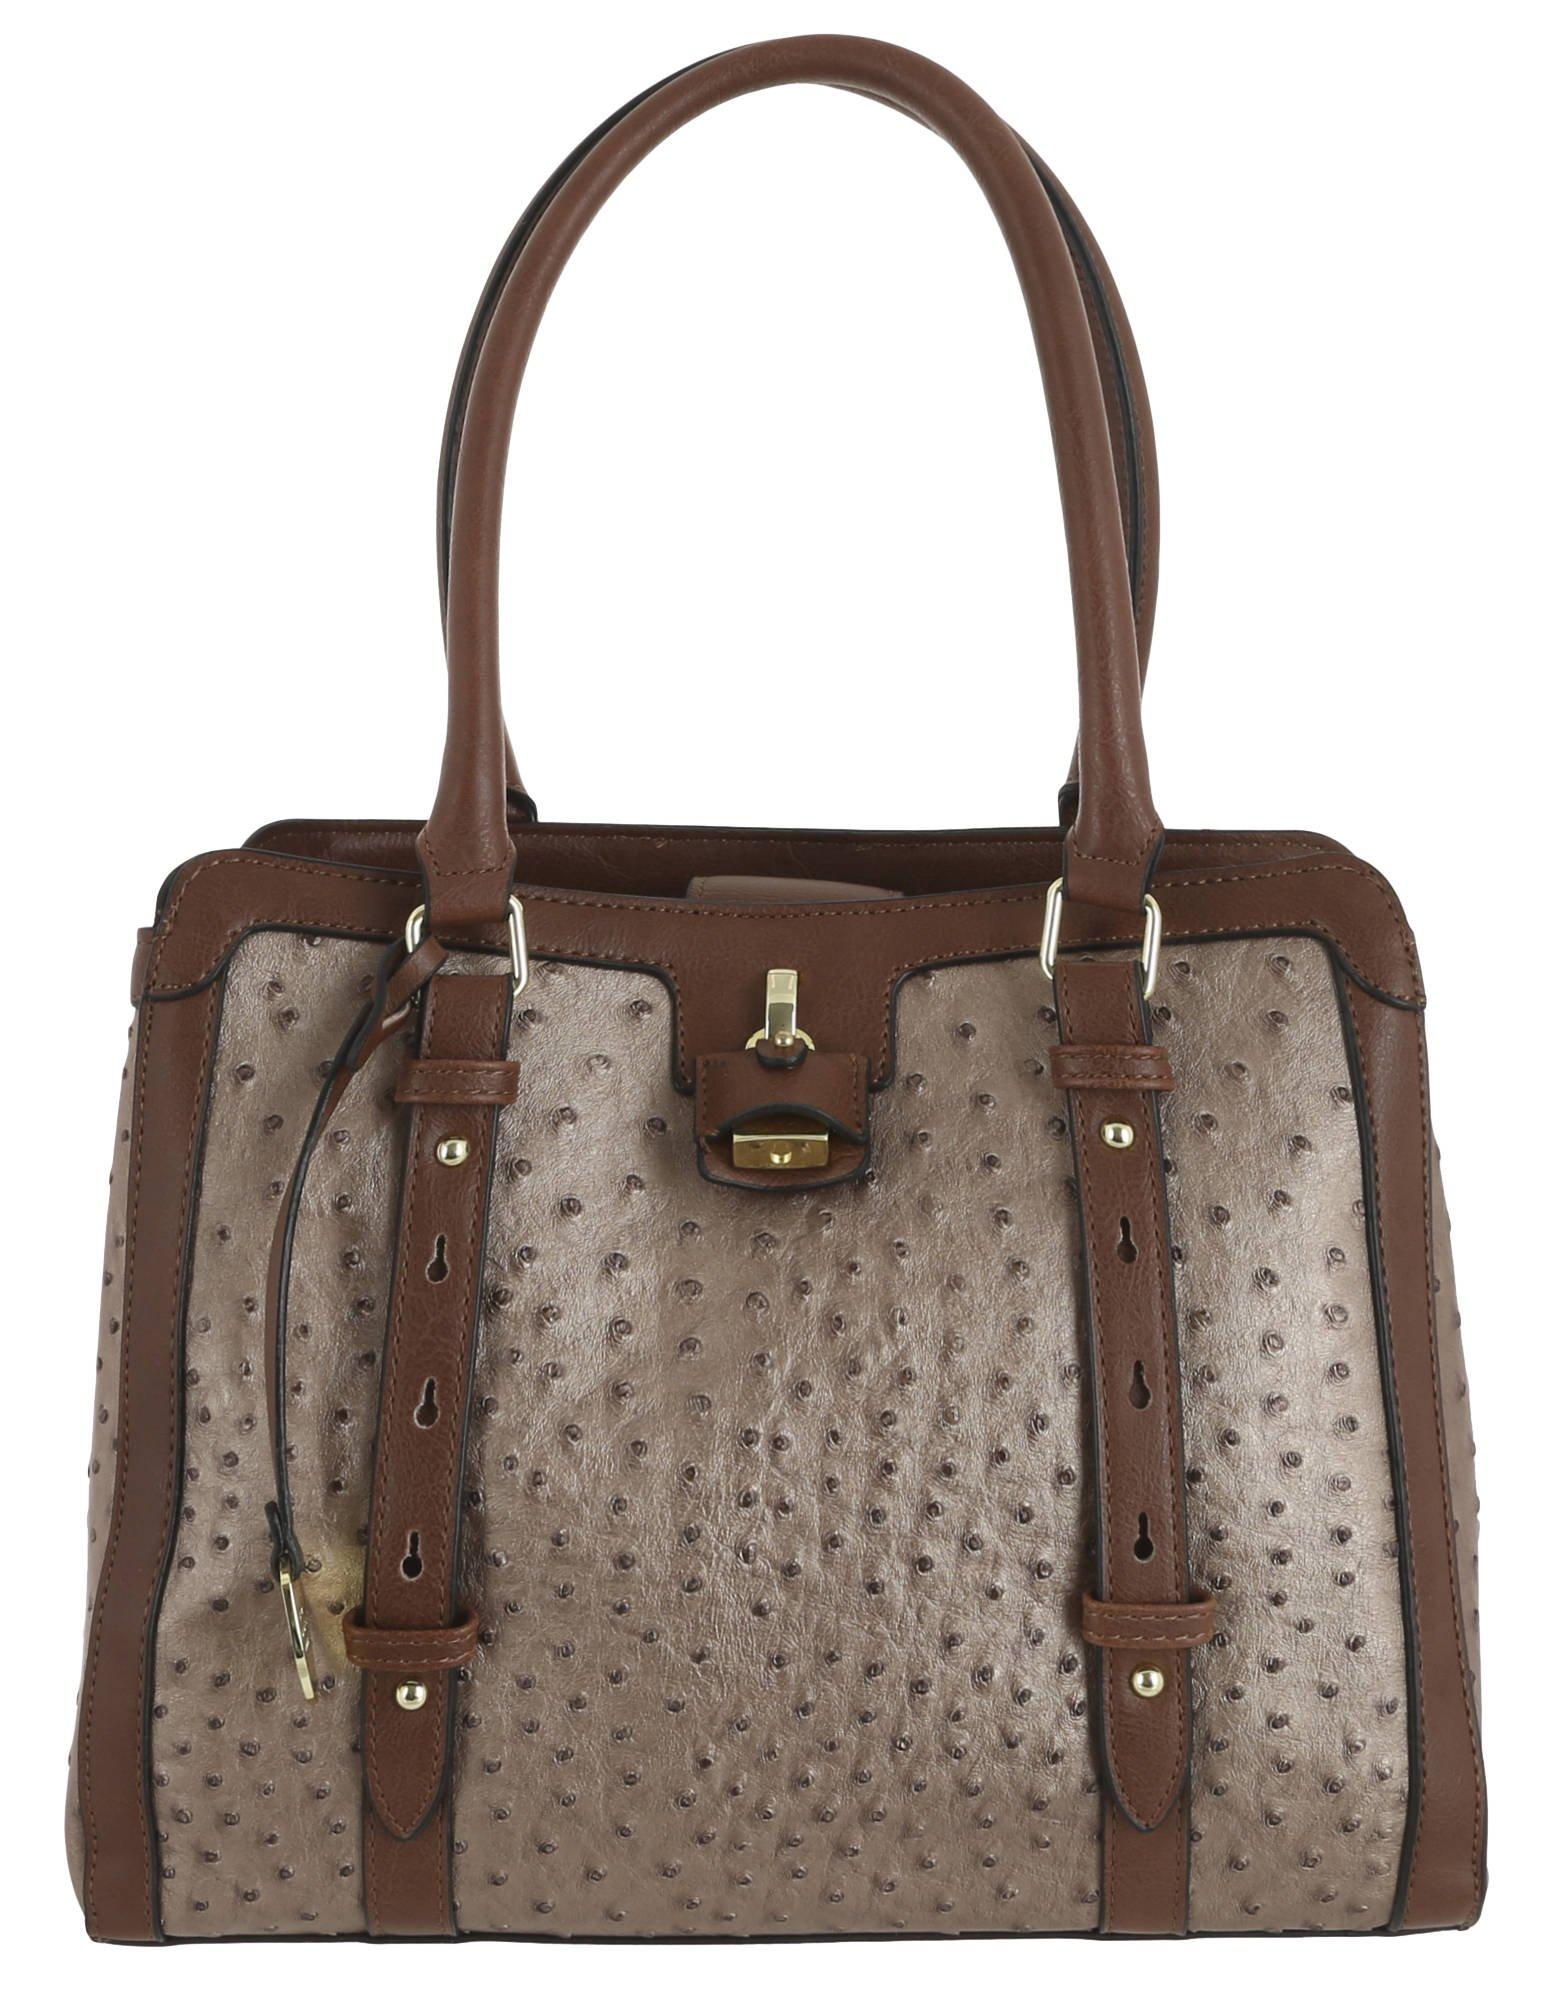 Lancaster Tote - Taupe | Burkes Outlet